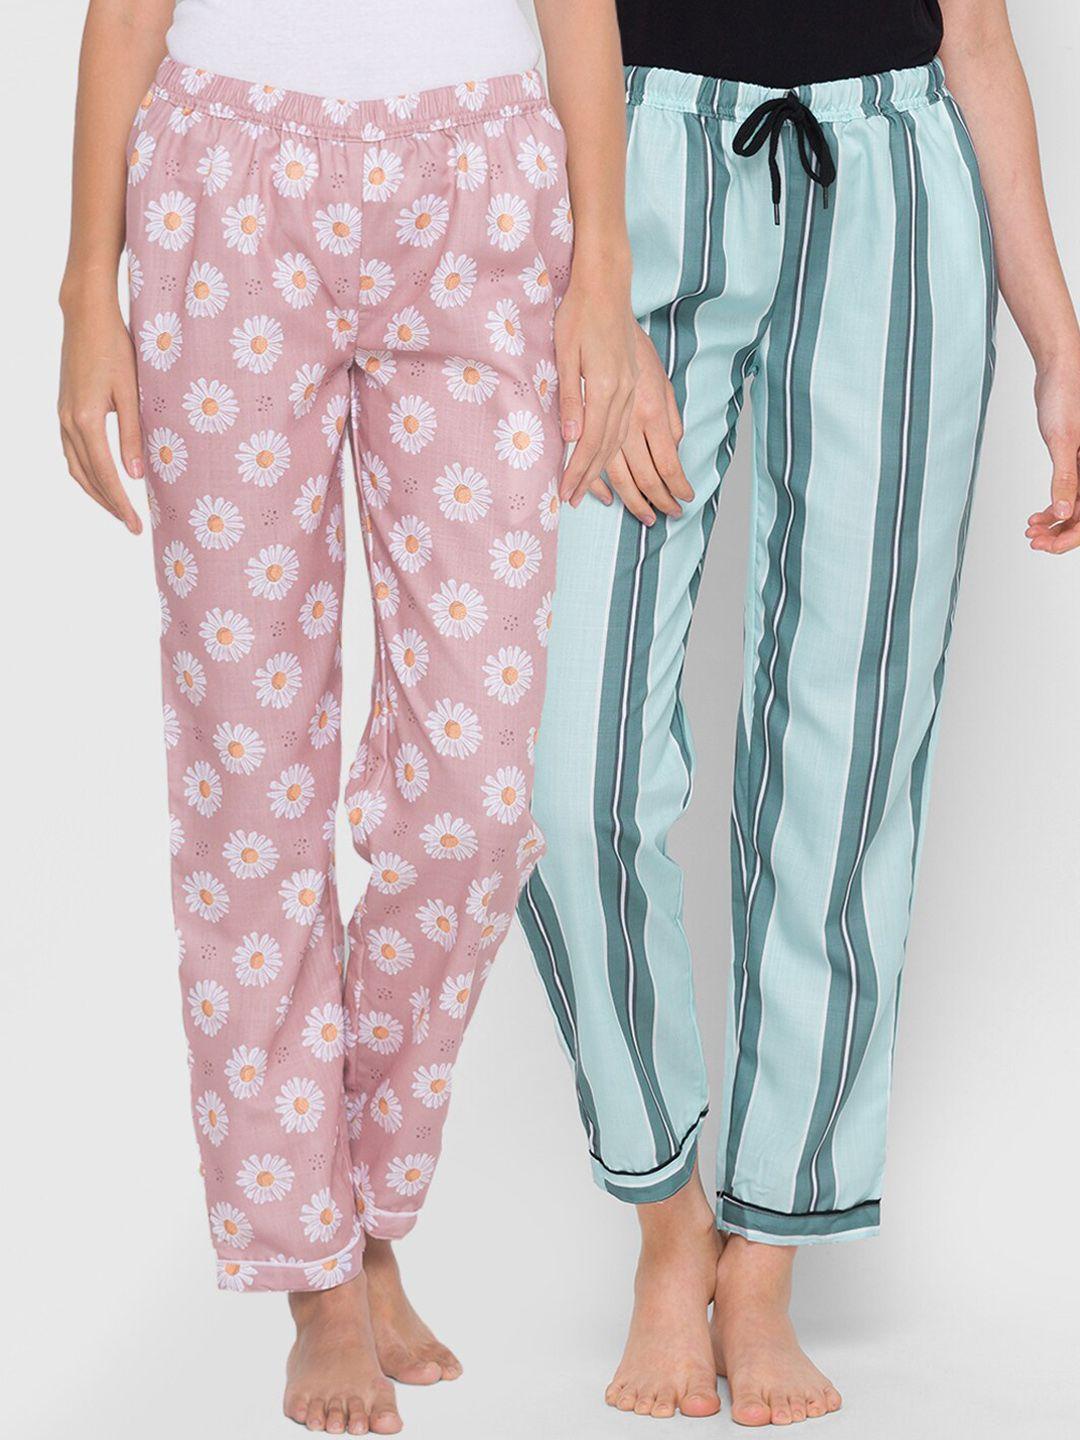 fashionrack pack of 2 women pink & turquoise blue printed cotton lounge pants